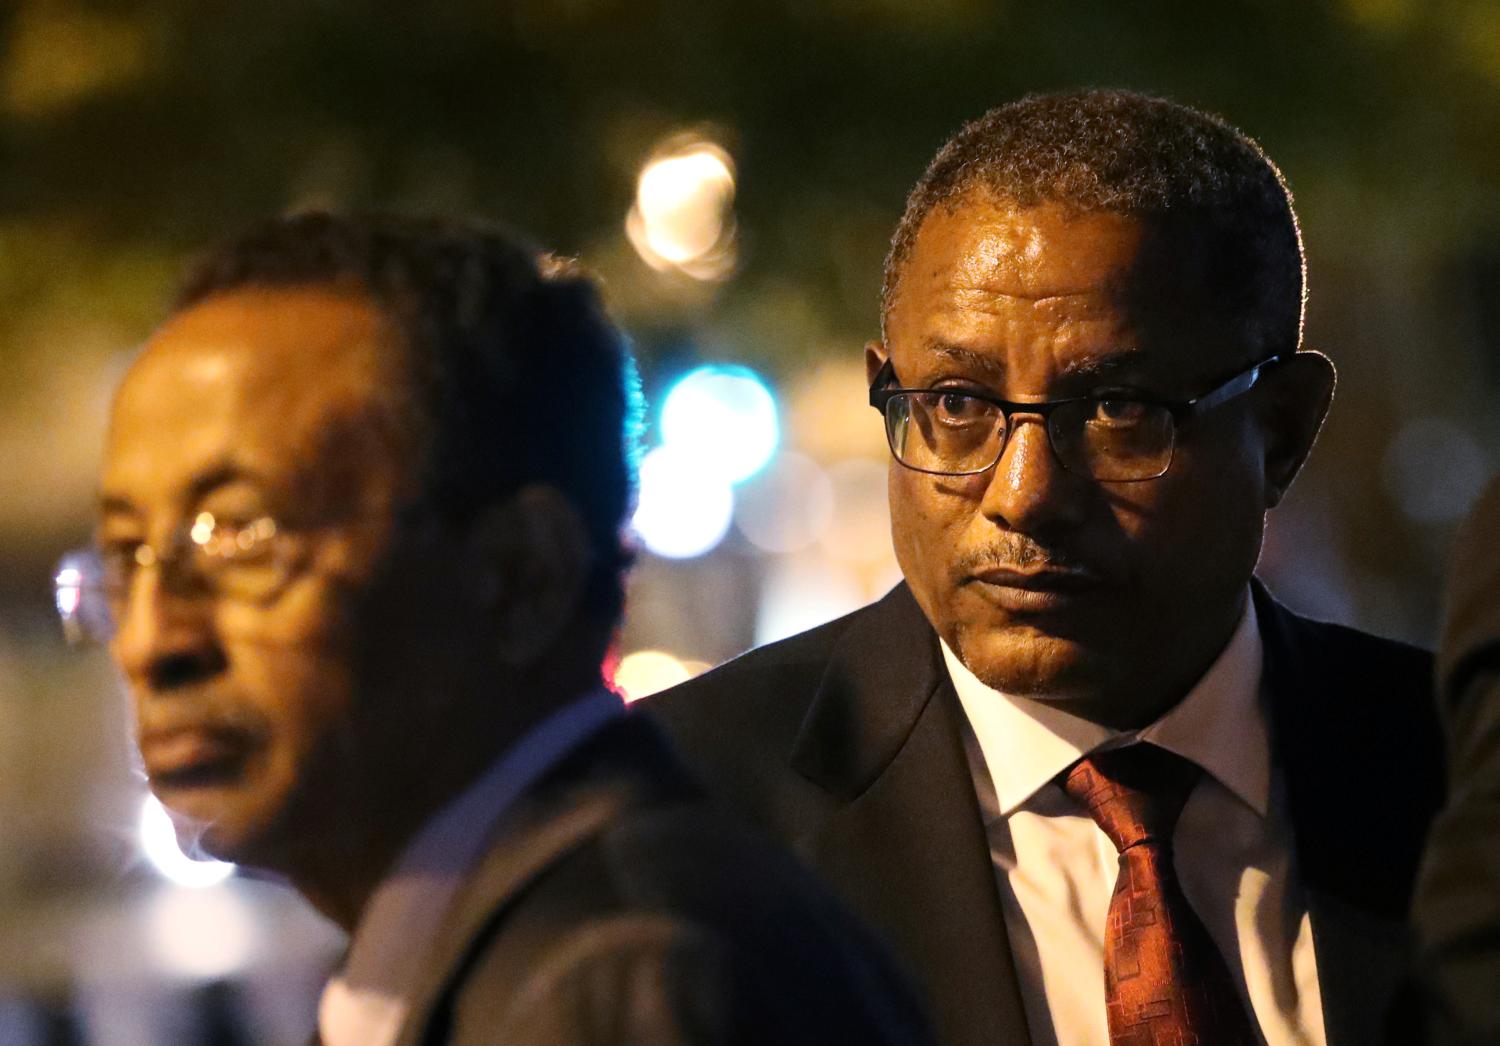 Ethiopian Foreign Minister Al Dardeery Mohamed Ahmed and his delegation leave the U.S. Treasury Department after negotiations on the disputed Grand Ethiopian Renaissance Dam, situated on the border between Ethiopia and Sudan, in Washington, U.S., November 6, 2019. REUTERS/Siphiwe Sibeko - RC206D9D9GFM